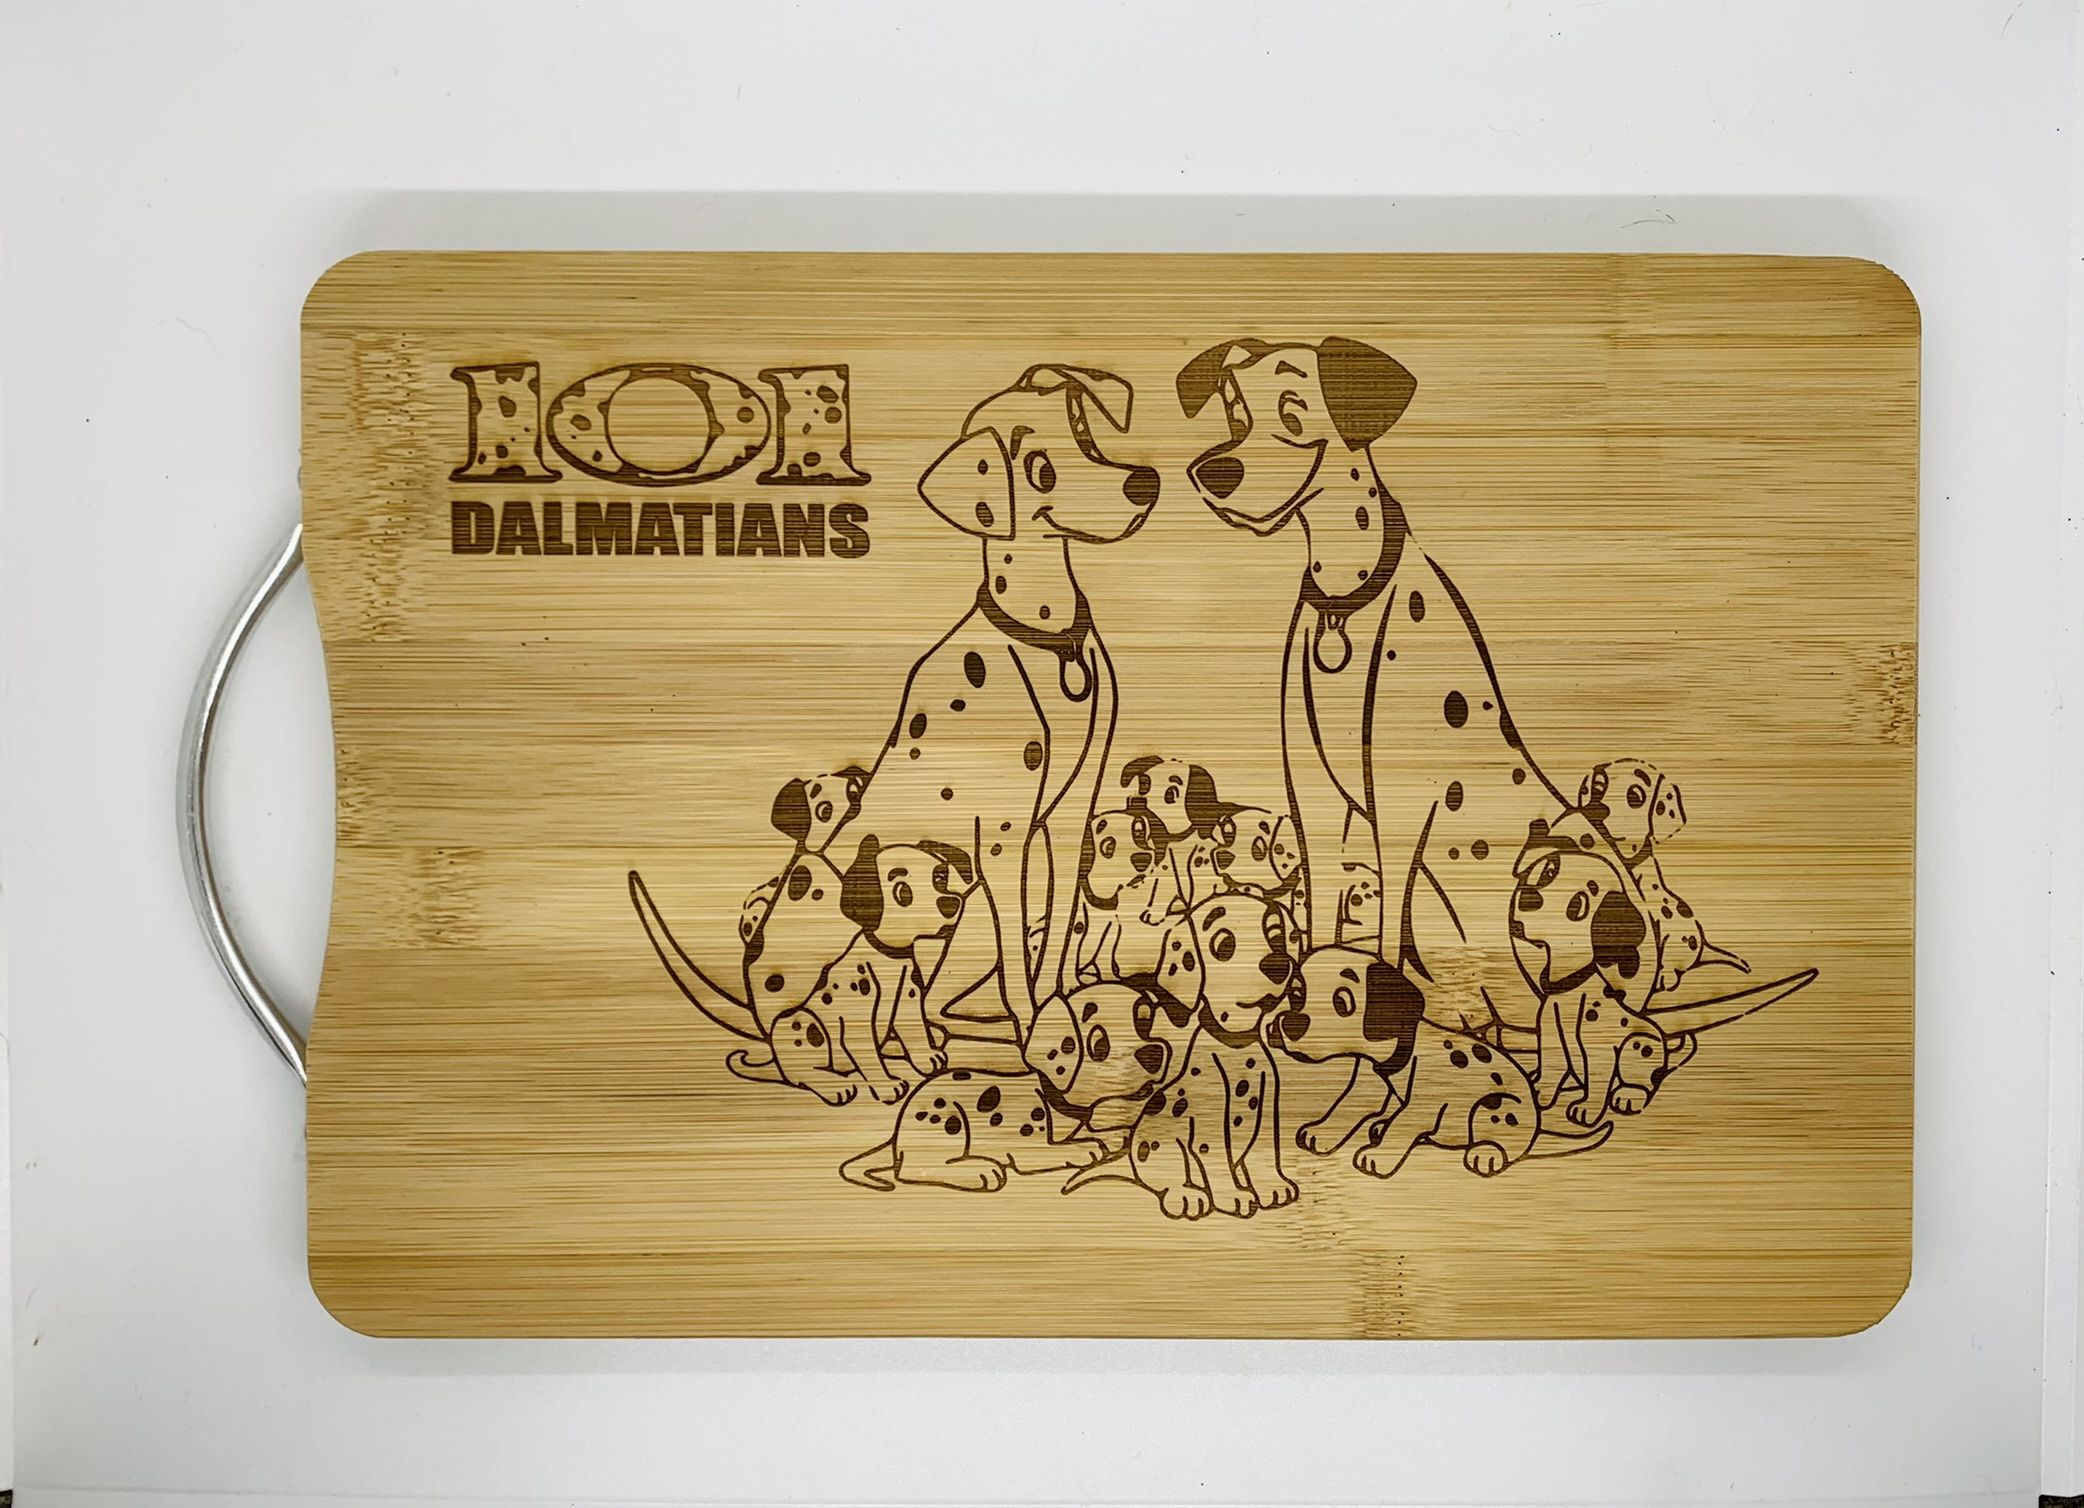 101 dalmatians laser engraved bamboo high quality cuttingboard pop gift